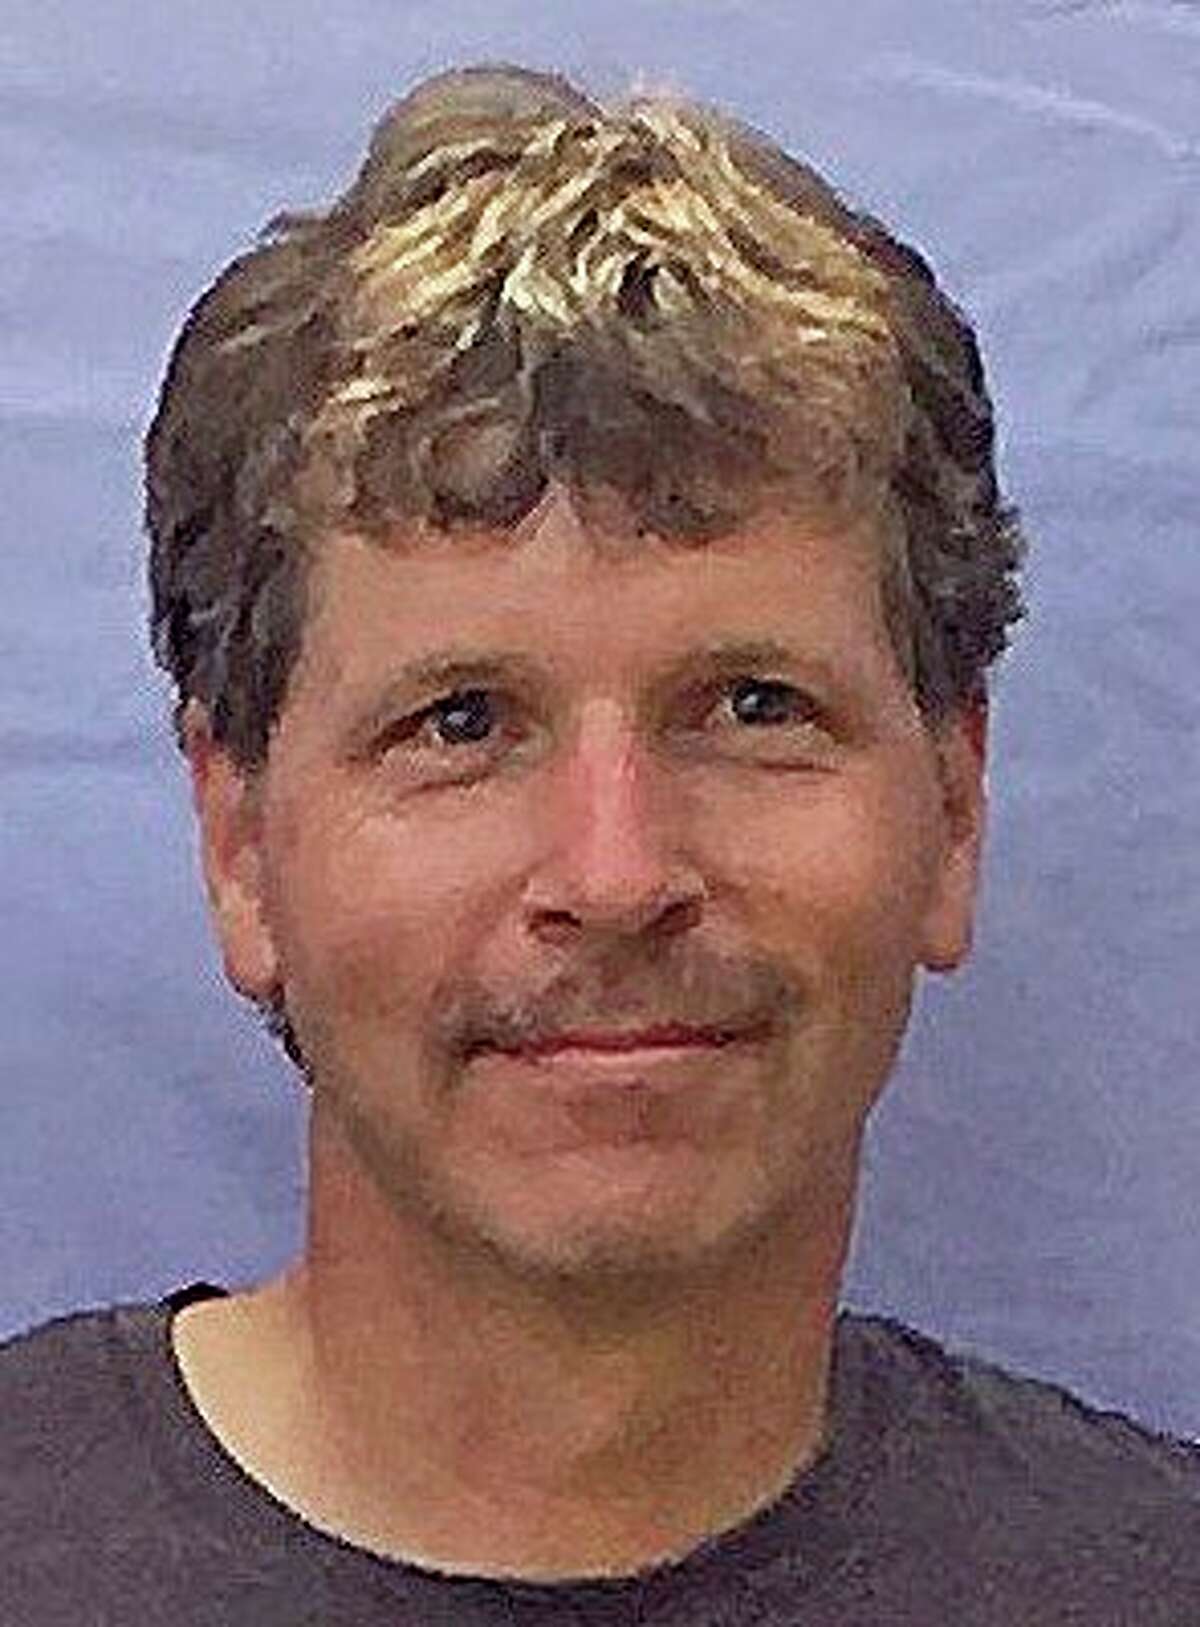 Mark Prescott, Bad Axe High School girls tennis coach, died Wednesday in a cycling accident west of Bad Axe. He is survived by his wife, Maria, and daughter, Jelena. (Tribune File Photo)